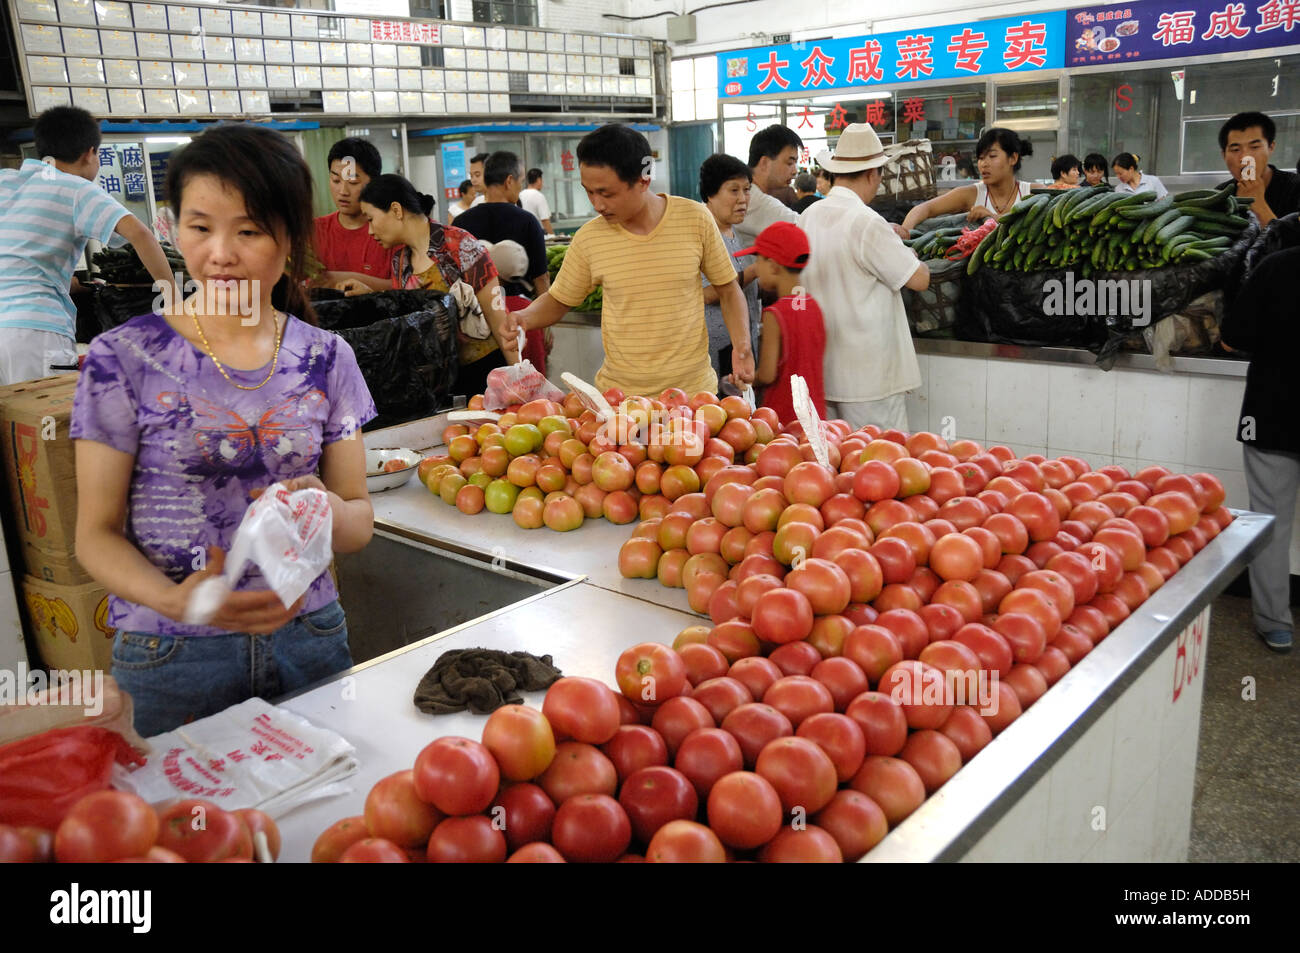 A woman sells tomatos in a food market in Beijing China 13 Aug 2007 Stock Photo